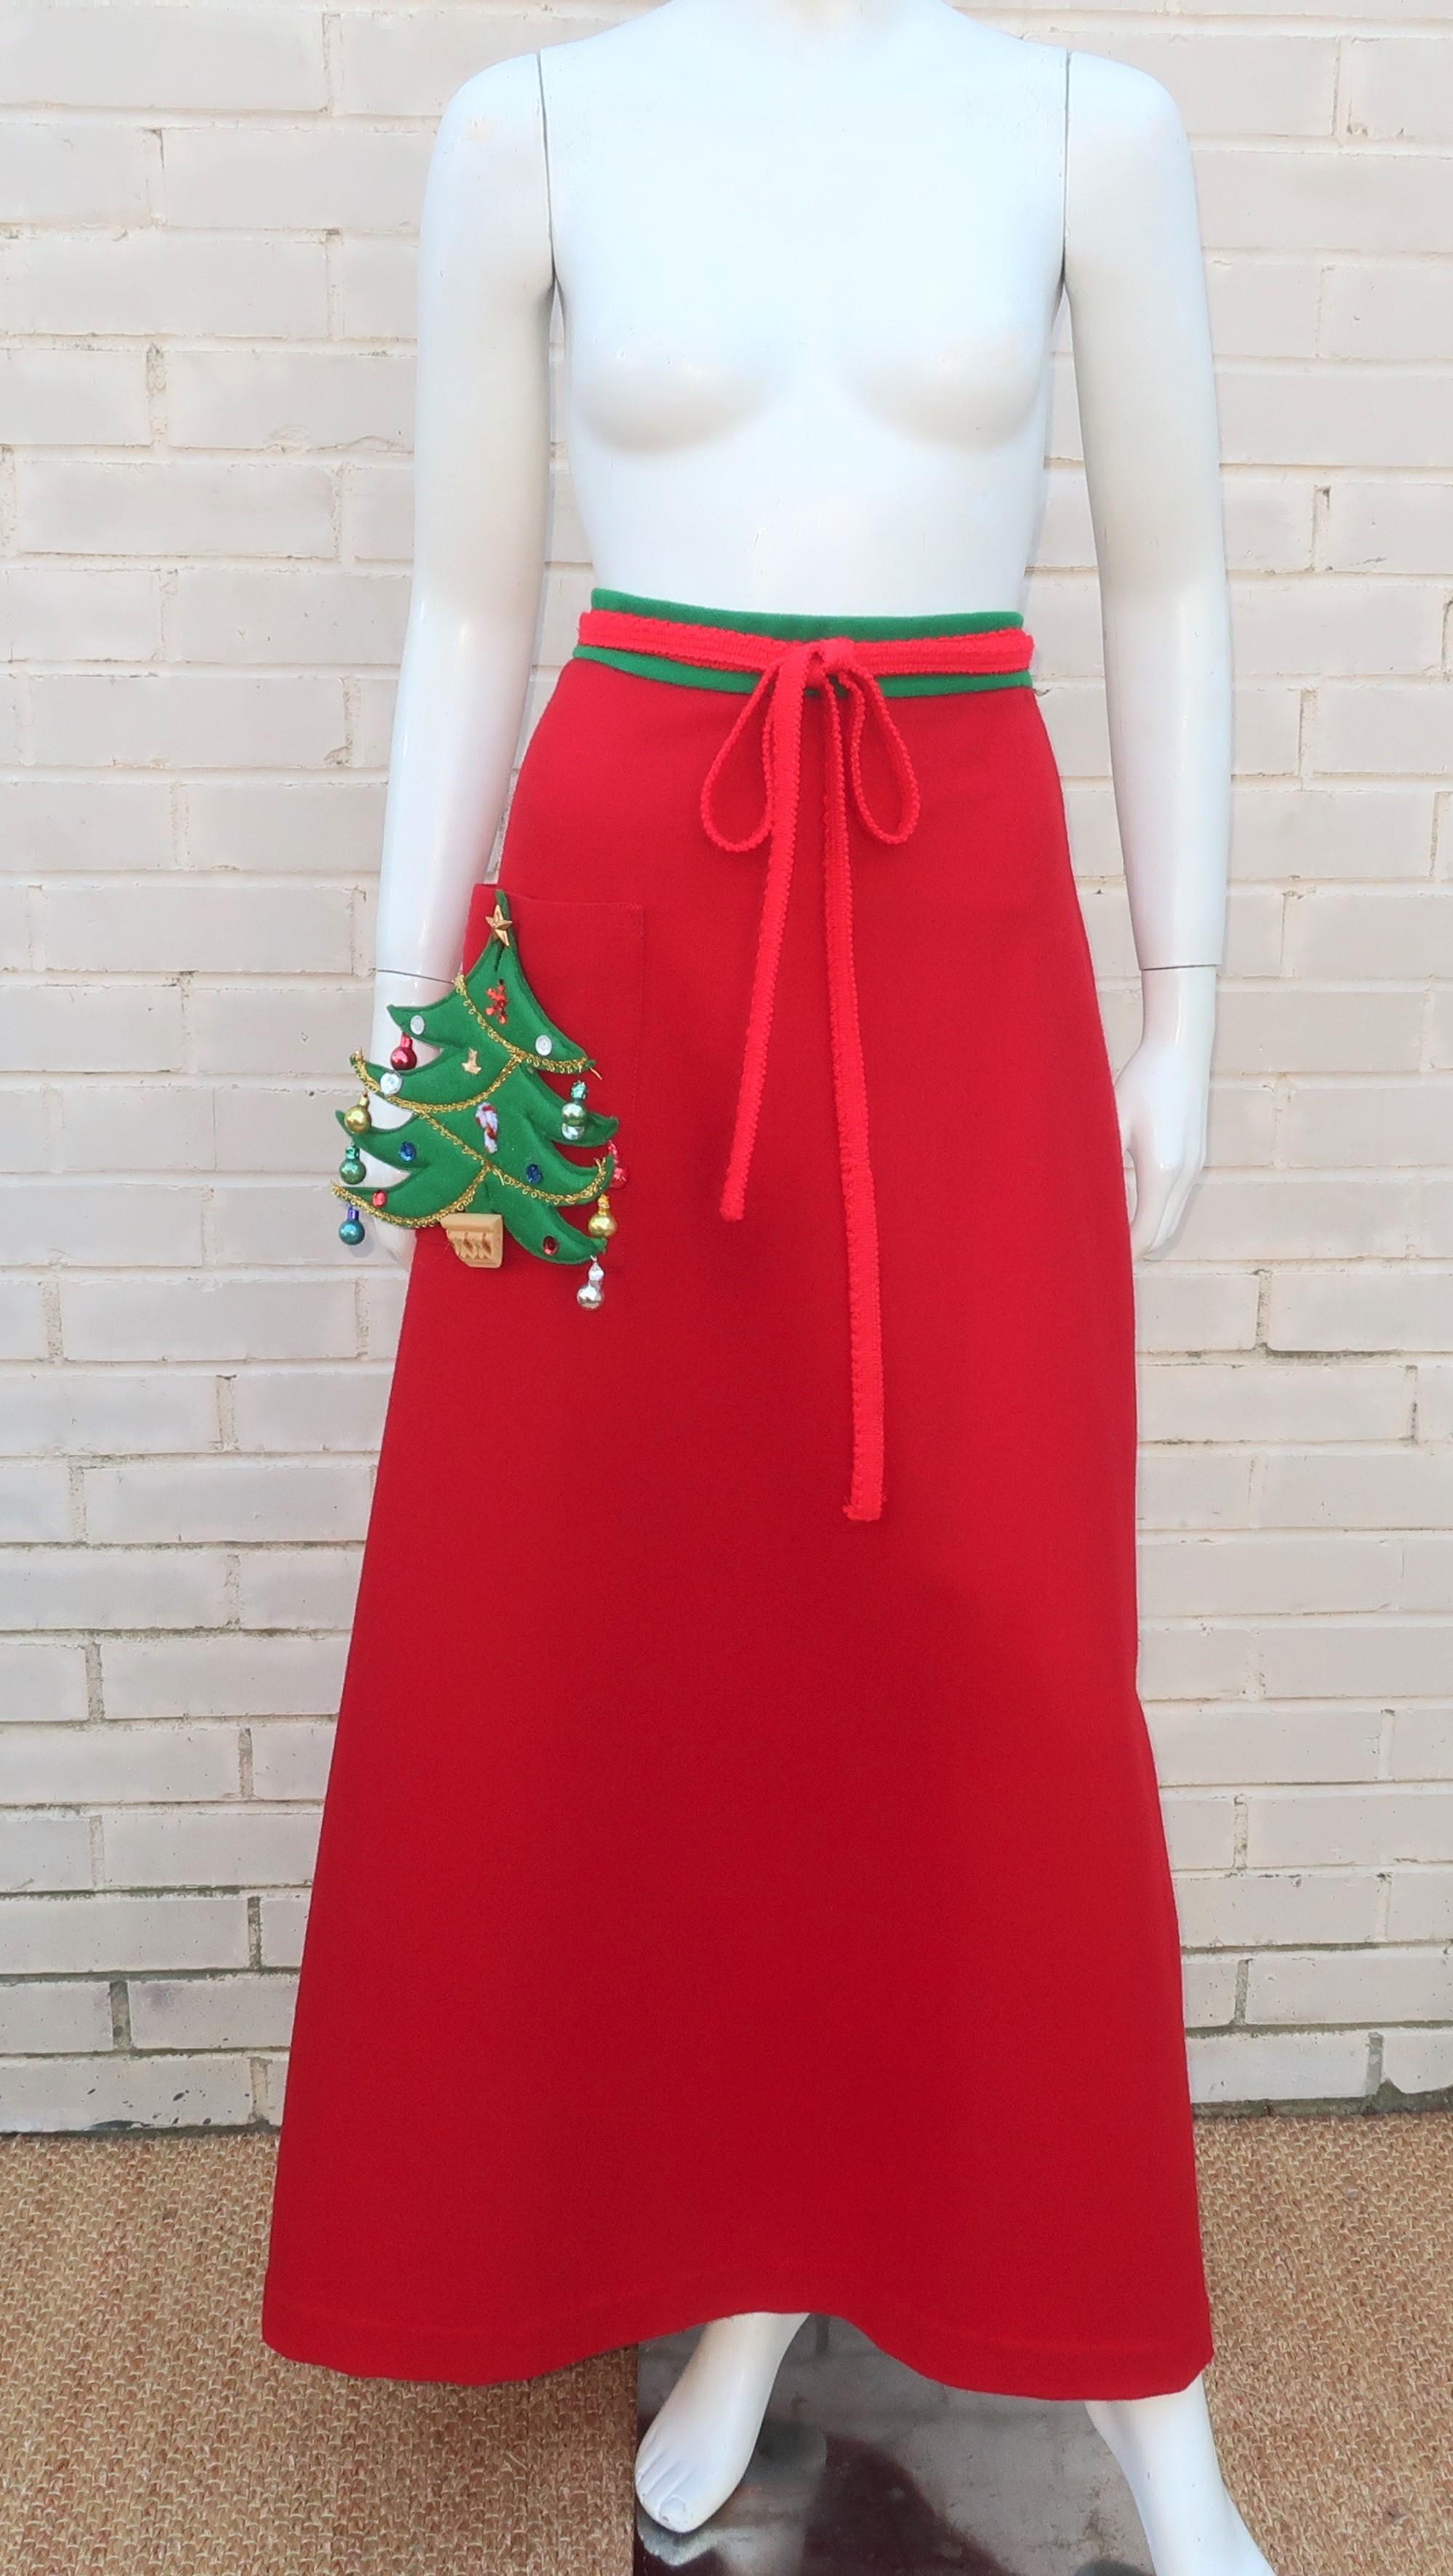 Greet guests this holiday season with a fun 1960's novelty skirt from Crabtree of Virginia.  The wrap skirt is fabricated from red wool with green trim, a red yarn waist tie and a charming removable felt Christmas tree adorned with glass ornaments